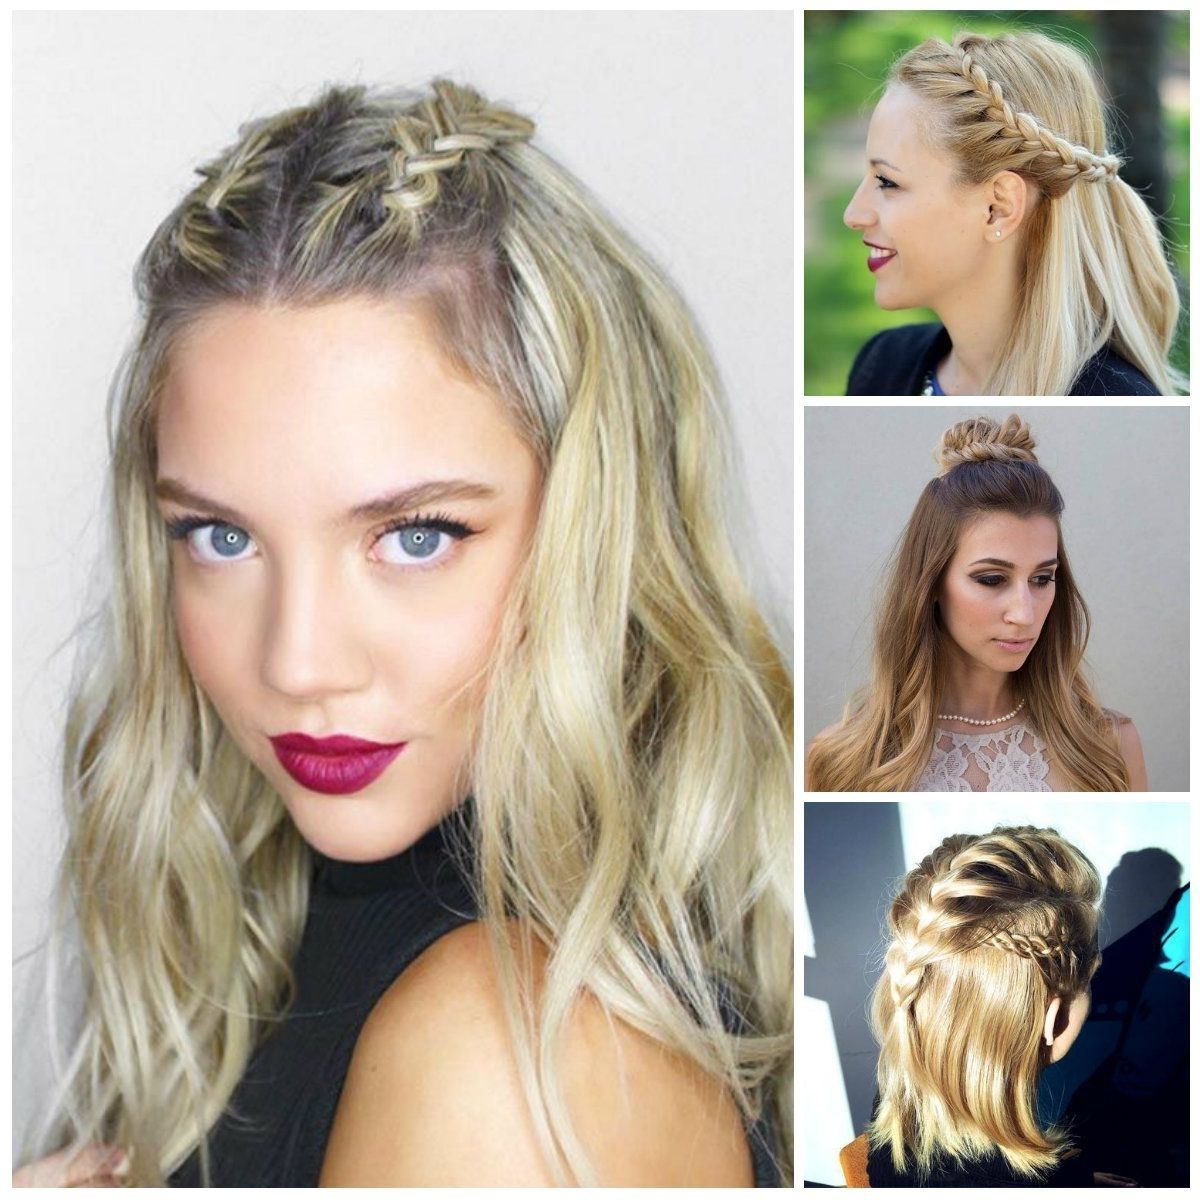 Braided Half Updo Hairstyles 2017 | Hairstyles | Pinterest | Braided Inside Braided Half Updo Hairstyles (View 15 of 15)